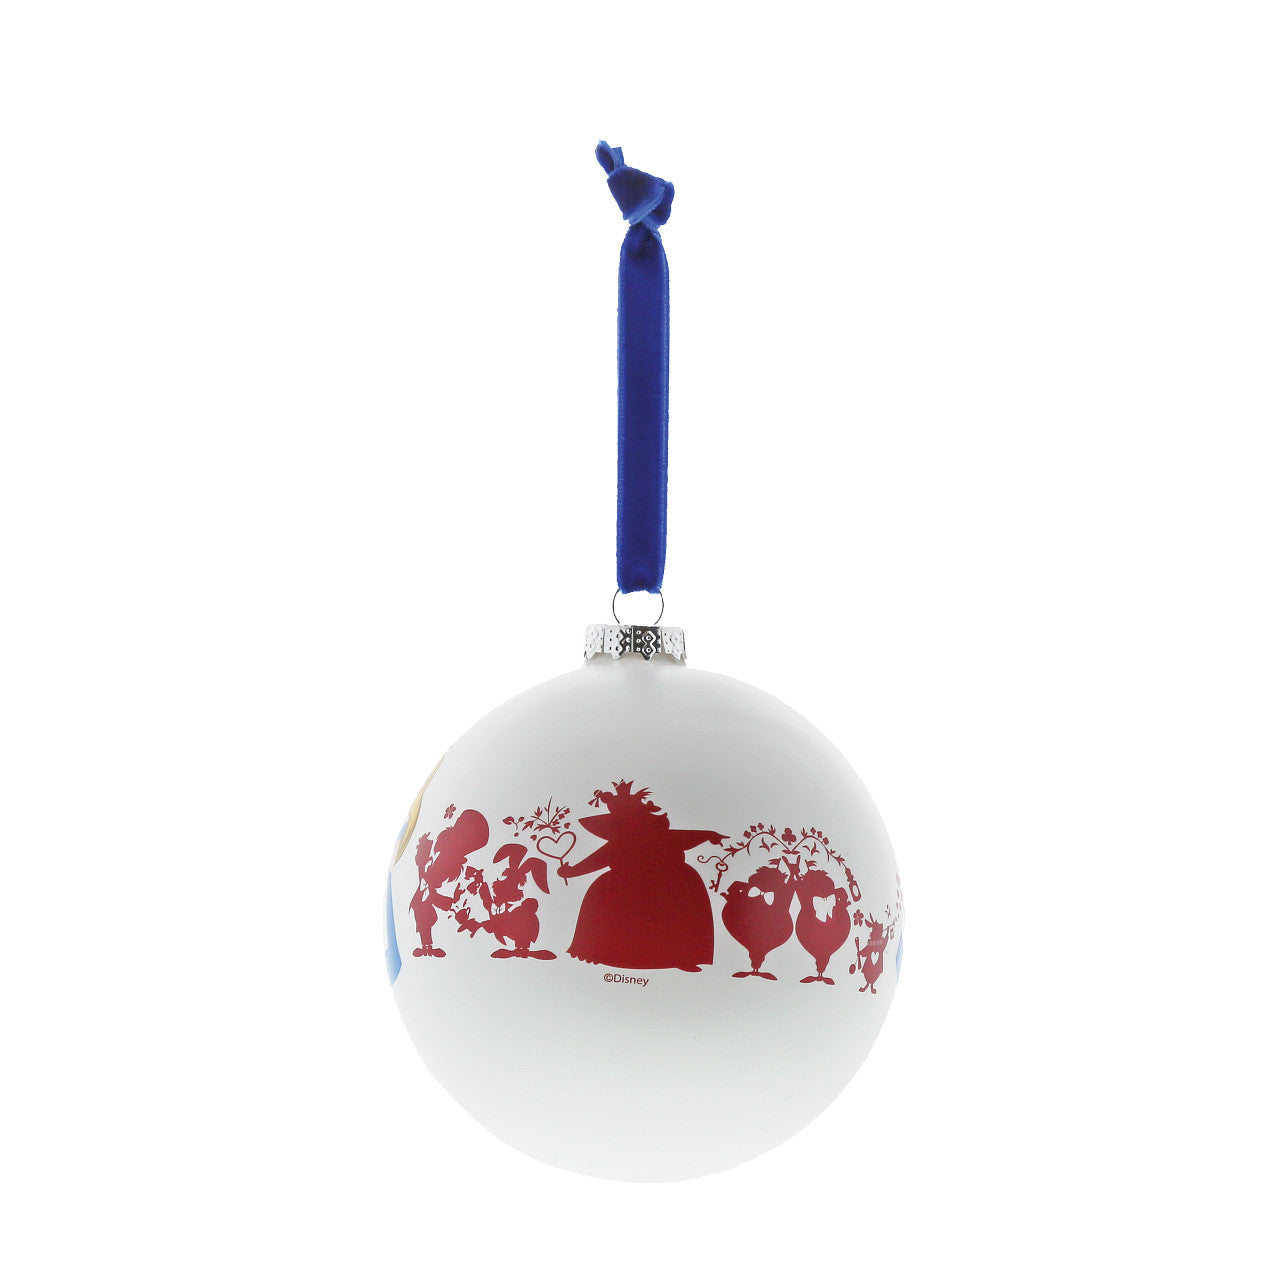 We're All Mad Here - Alice in Wonderland Bauble